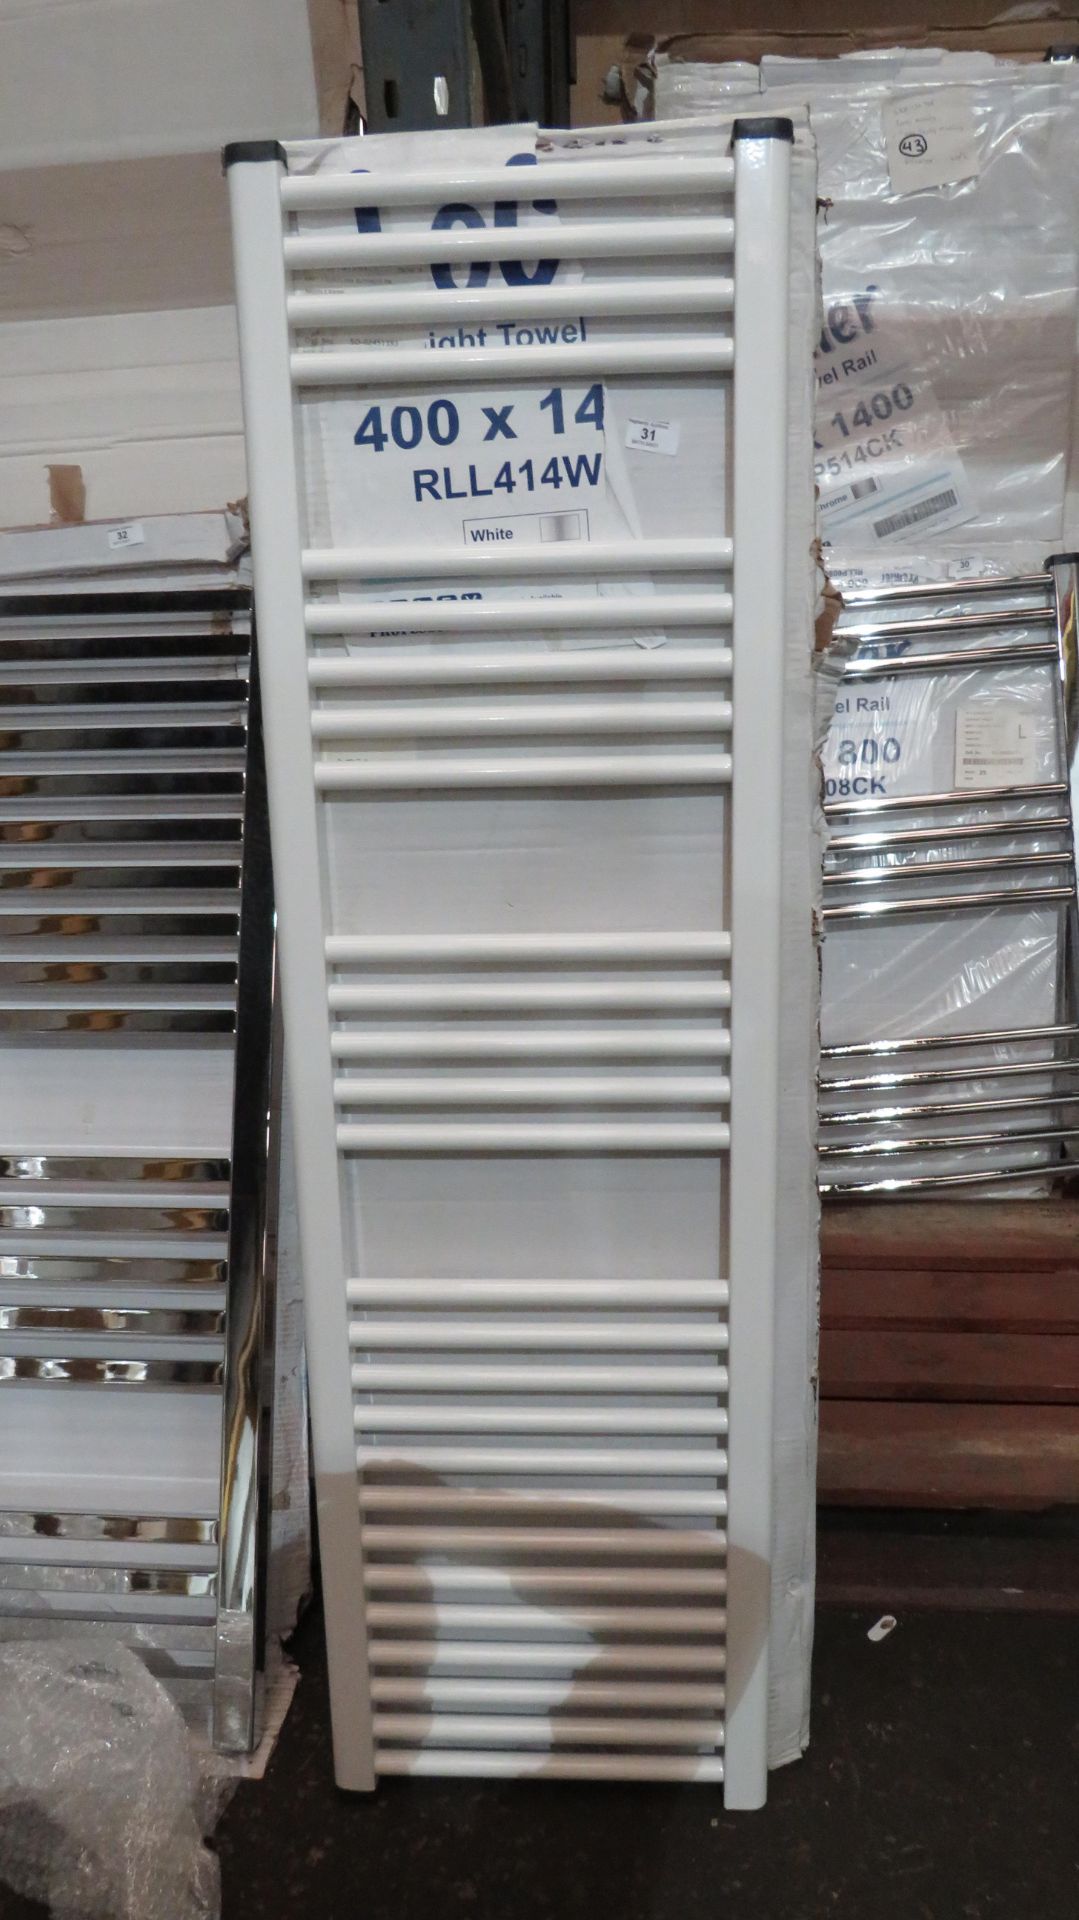 Loco 400x1400mm towel radiator, Please note, this radiator is ex-display and may contain minor marks